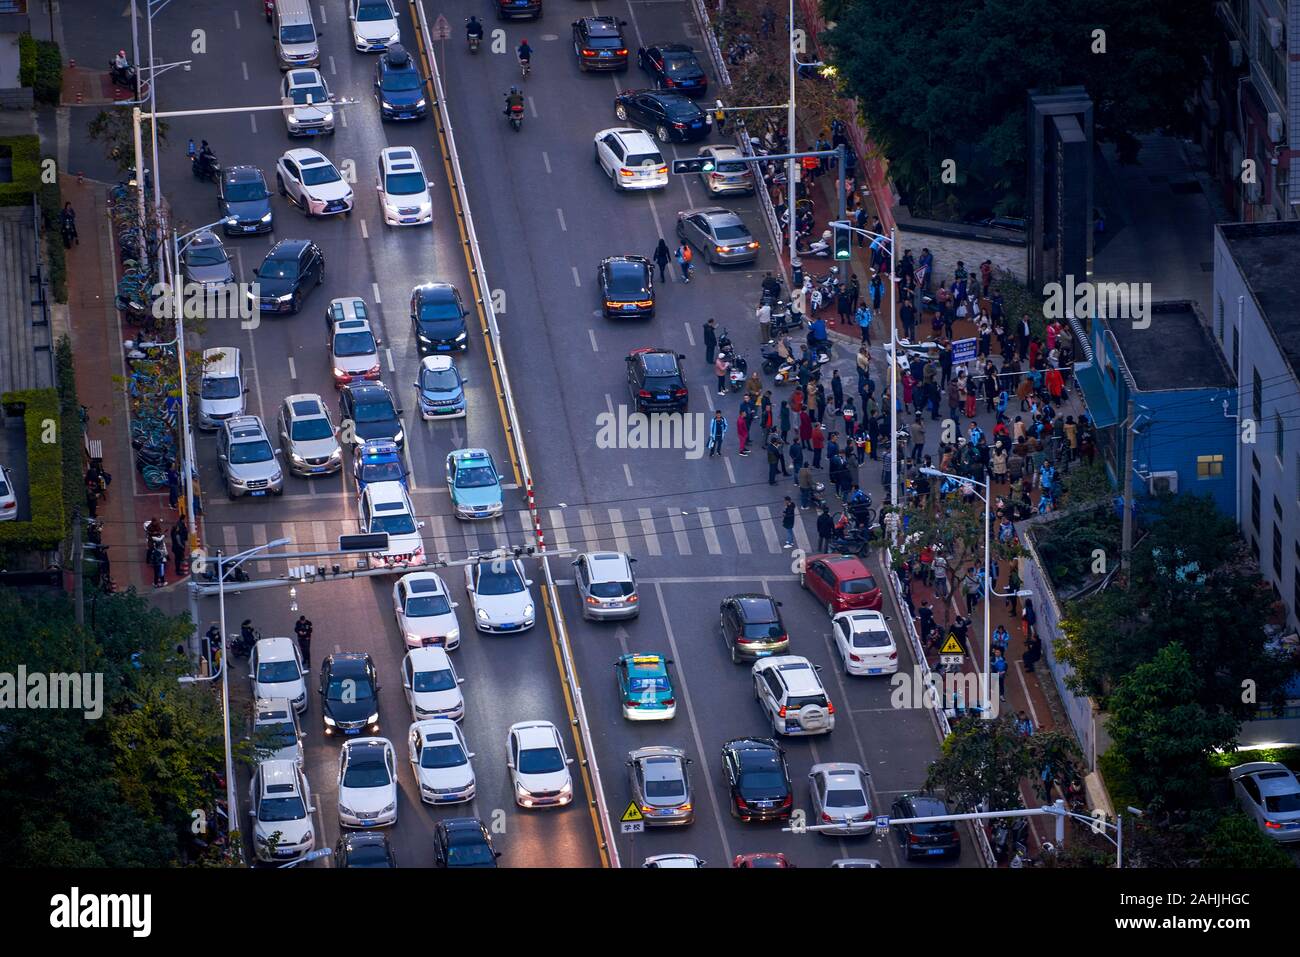 Congestion caused by school leaving in the city Stock Photo